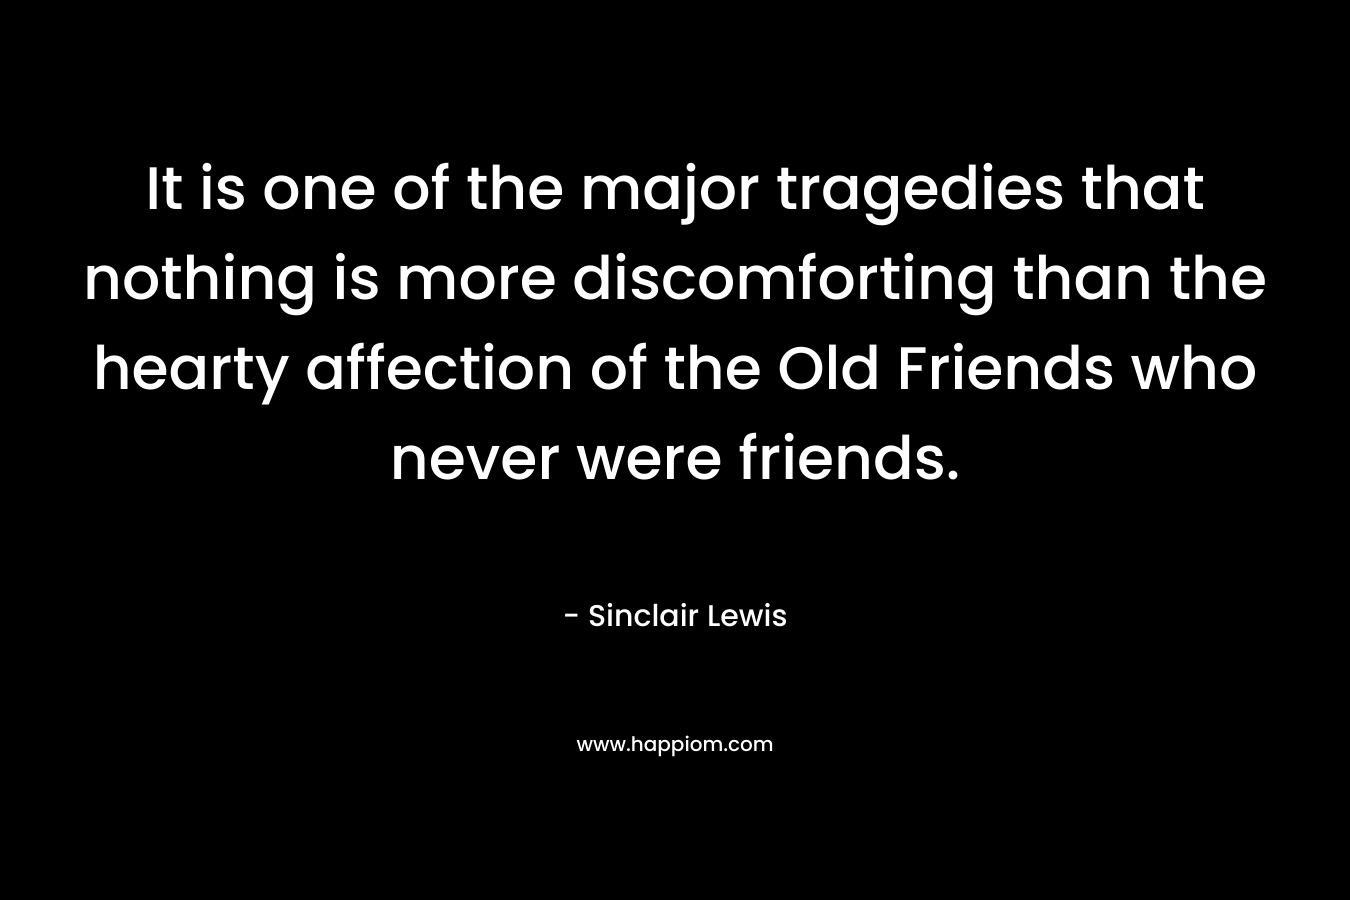 It is one of the major tragedies that nothing is more discomforting than the hearty affection of the Old Friends who never were friends. – Sinclair Lewis